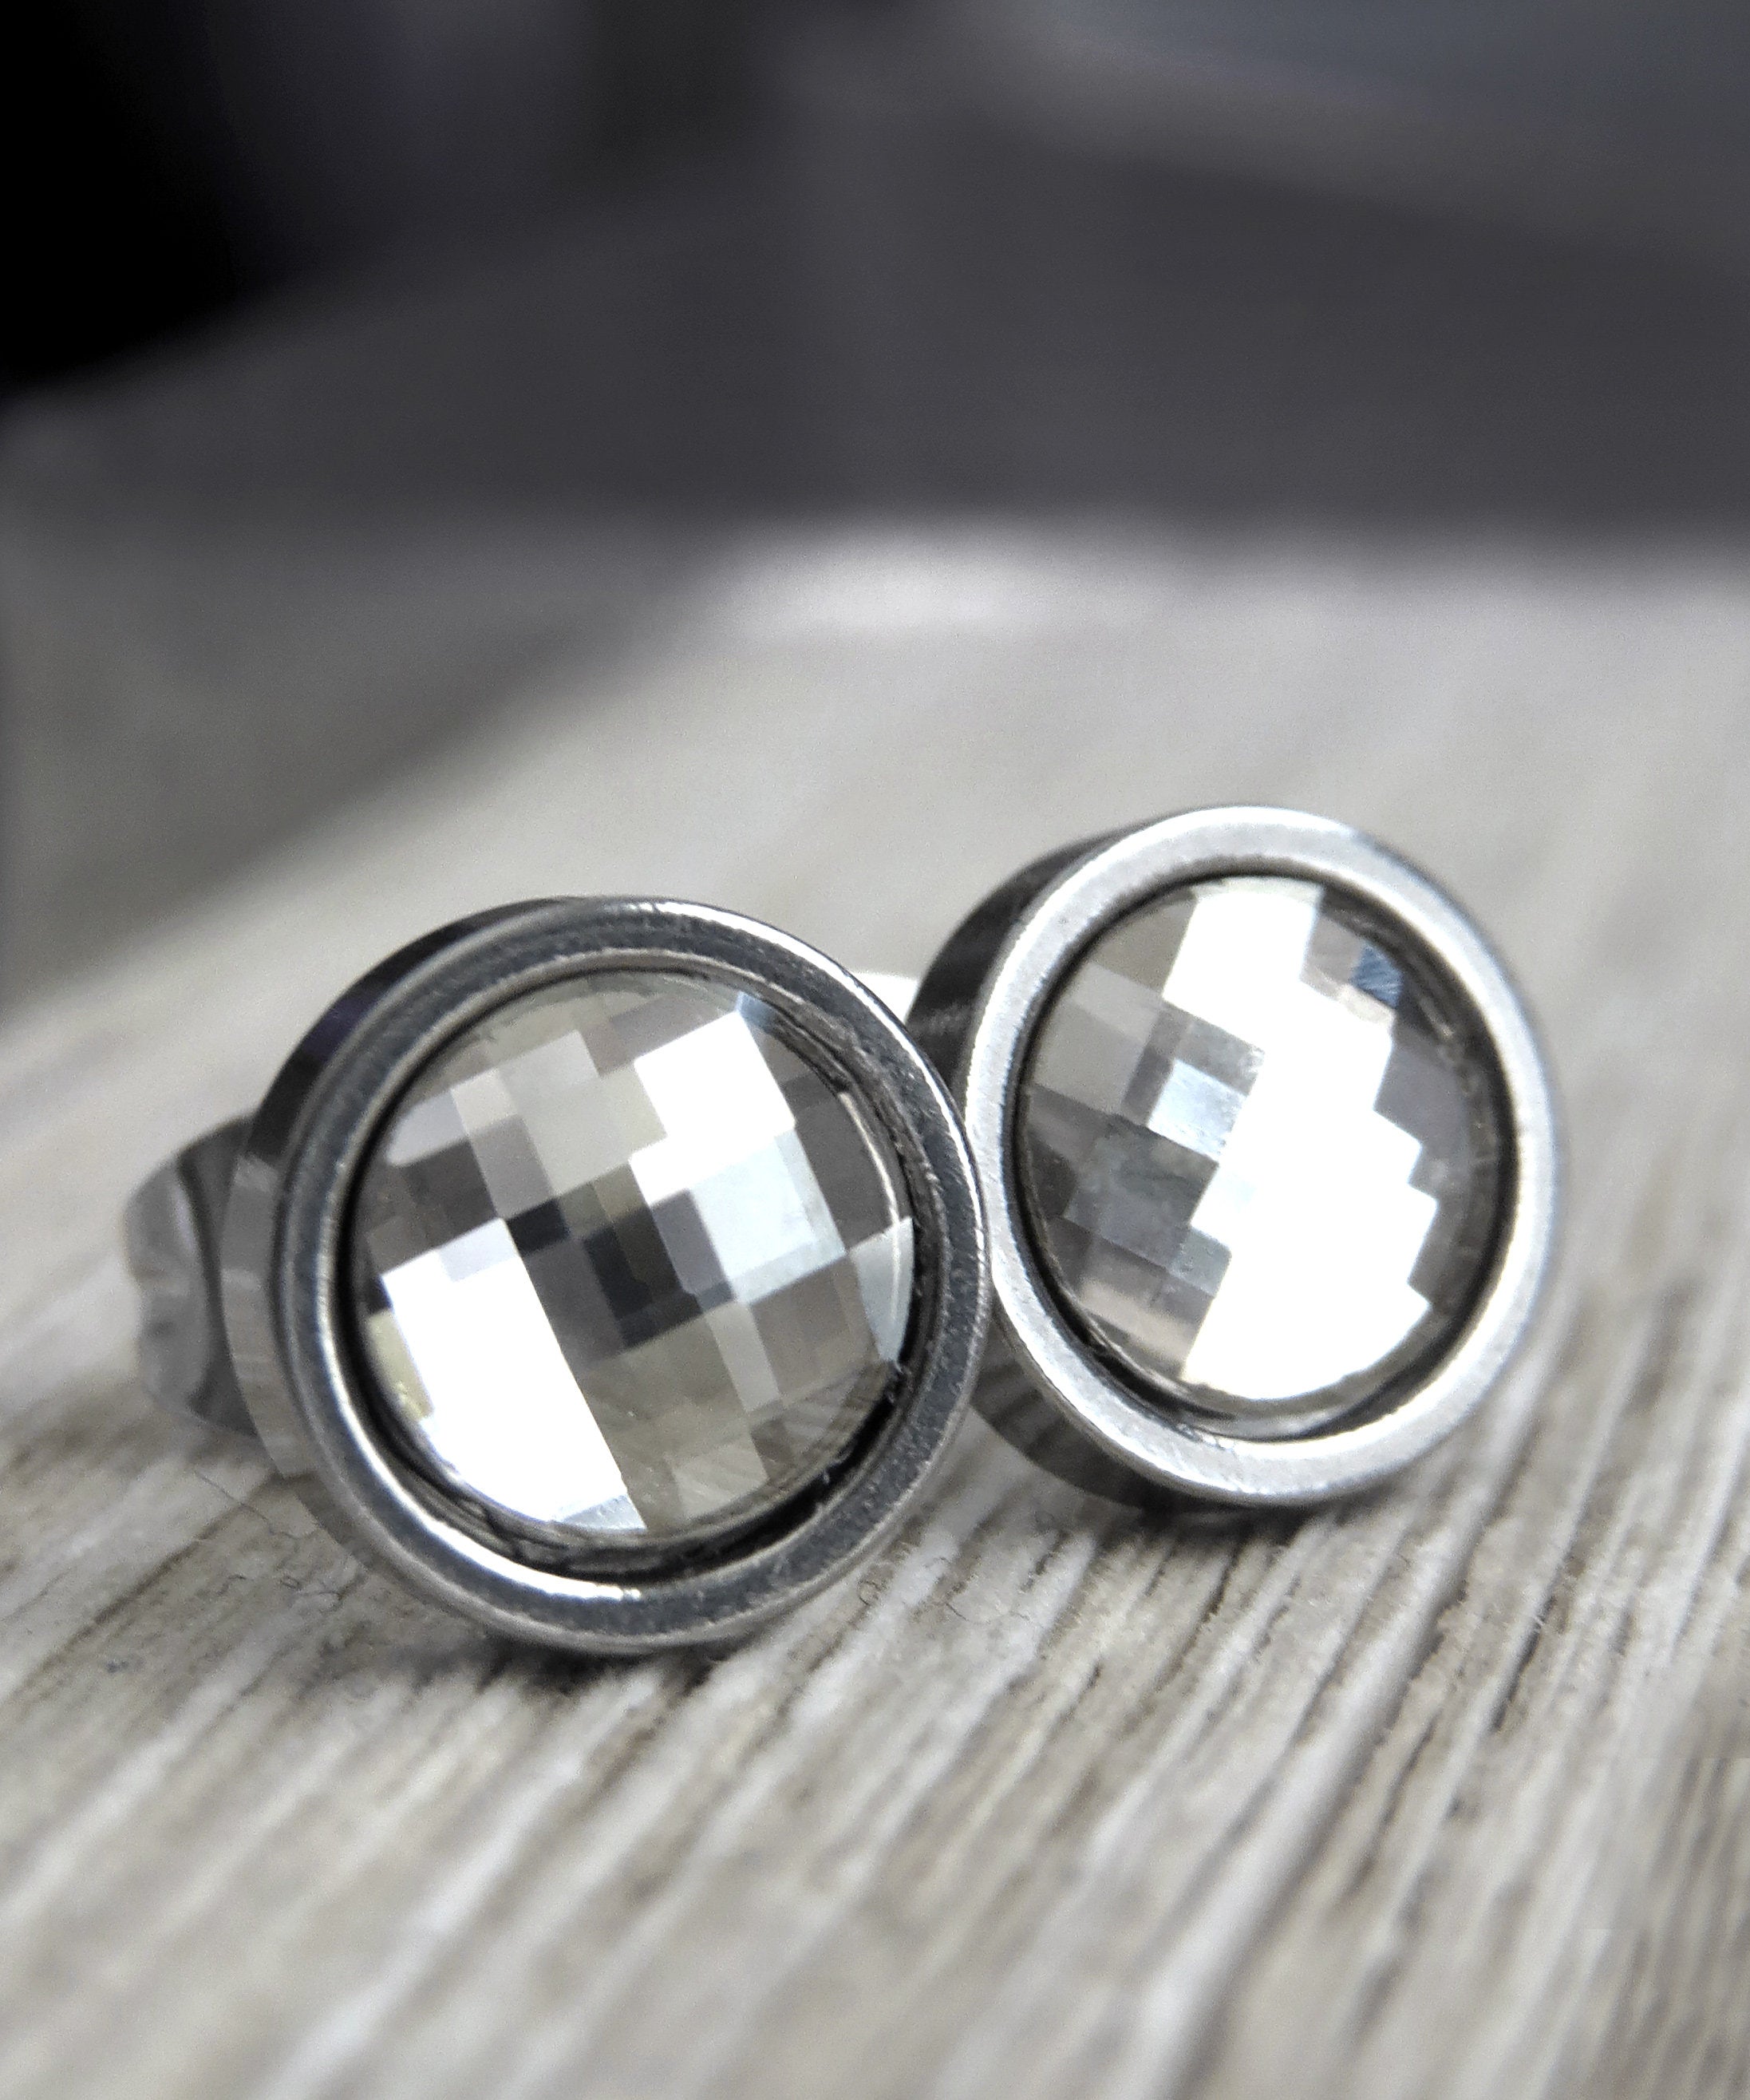 MOSAIC - Mirror Crystal Studs, Small Unisex Post Earrings with Silver Clear Swarovski Crystal - Modern Minimal Womens Mens Silver Jewelry